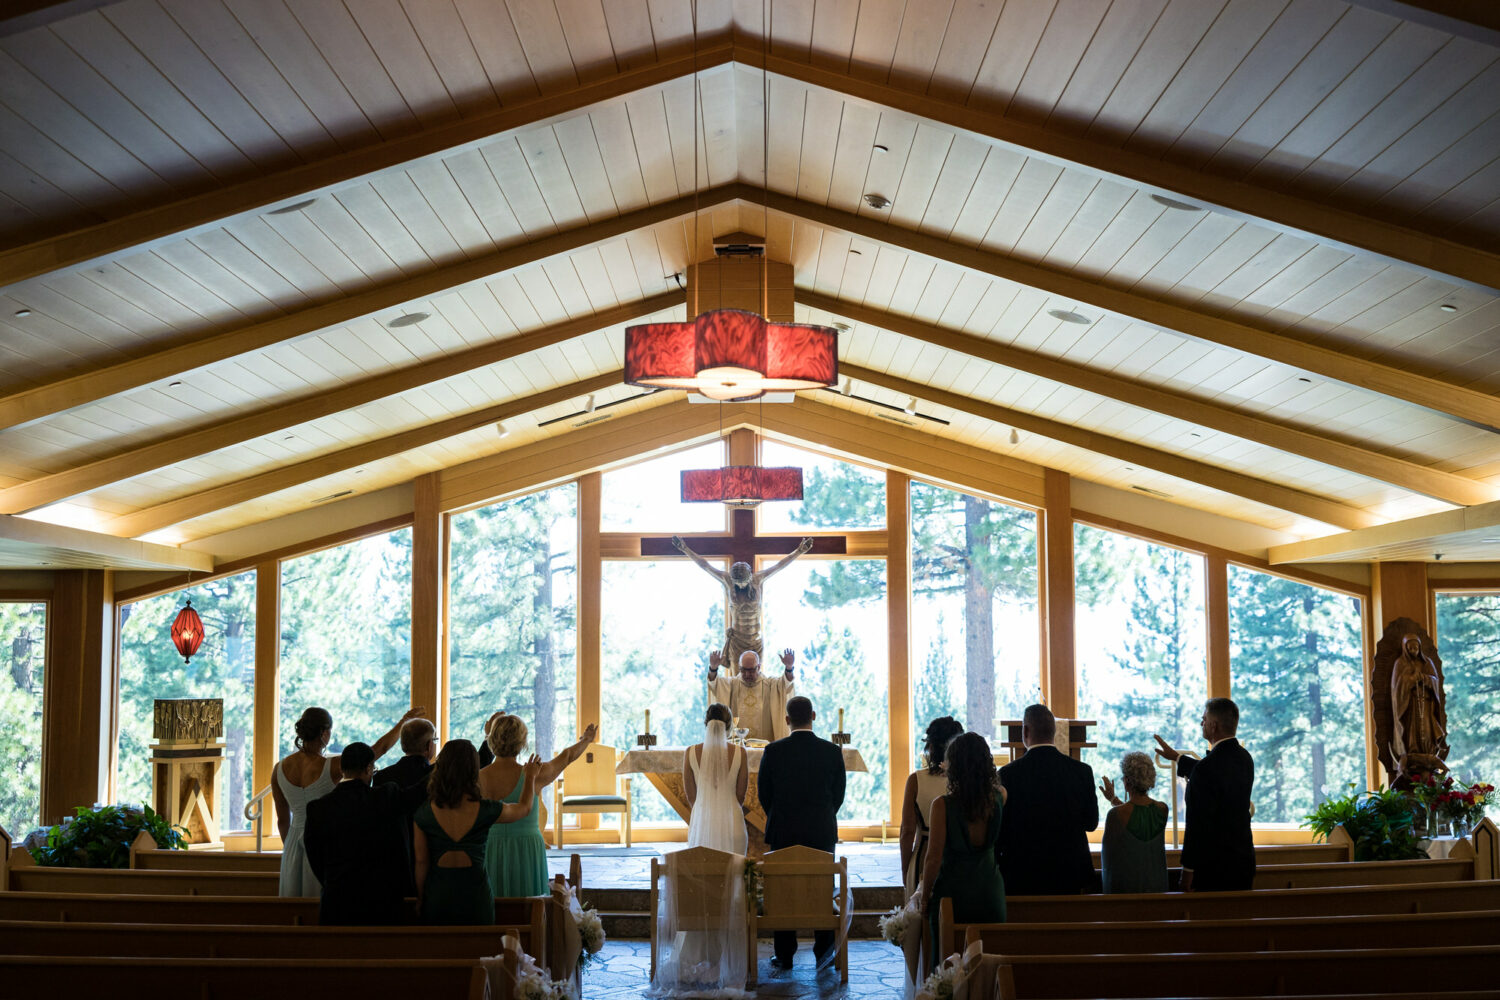 The congregation blesses a bride and groom during a Catholic wedding at St Francis of Assisi church in Lake Tahoe.